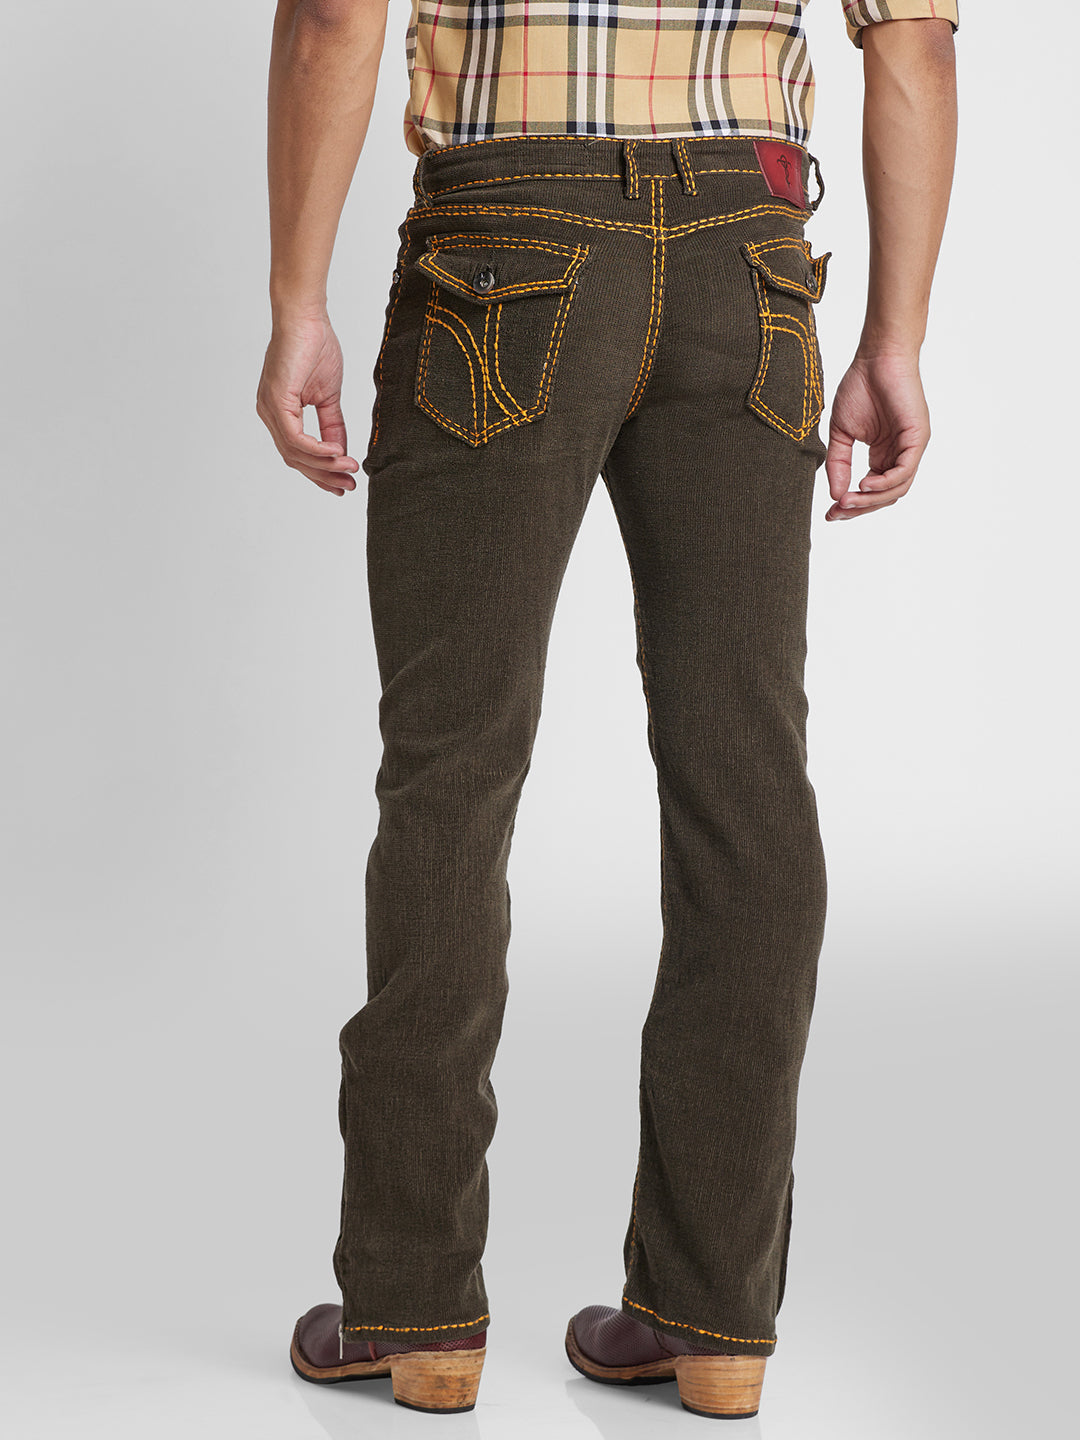 Brown Bootcut Corduroy With Mustard Saddle Stitch And Bottom Zipper